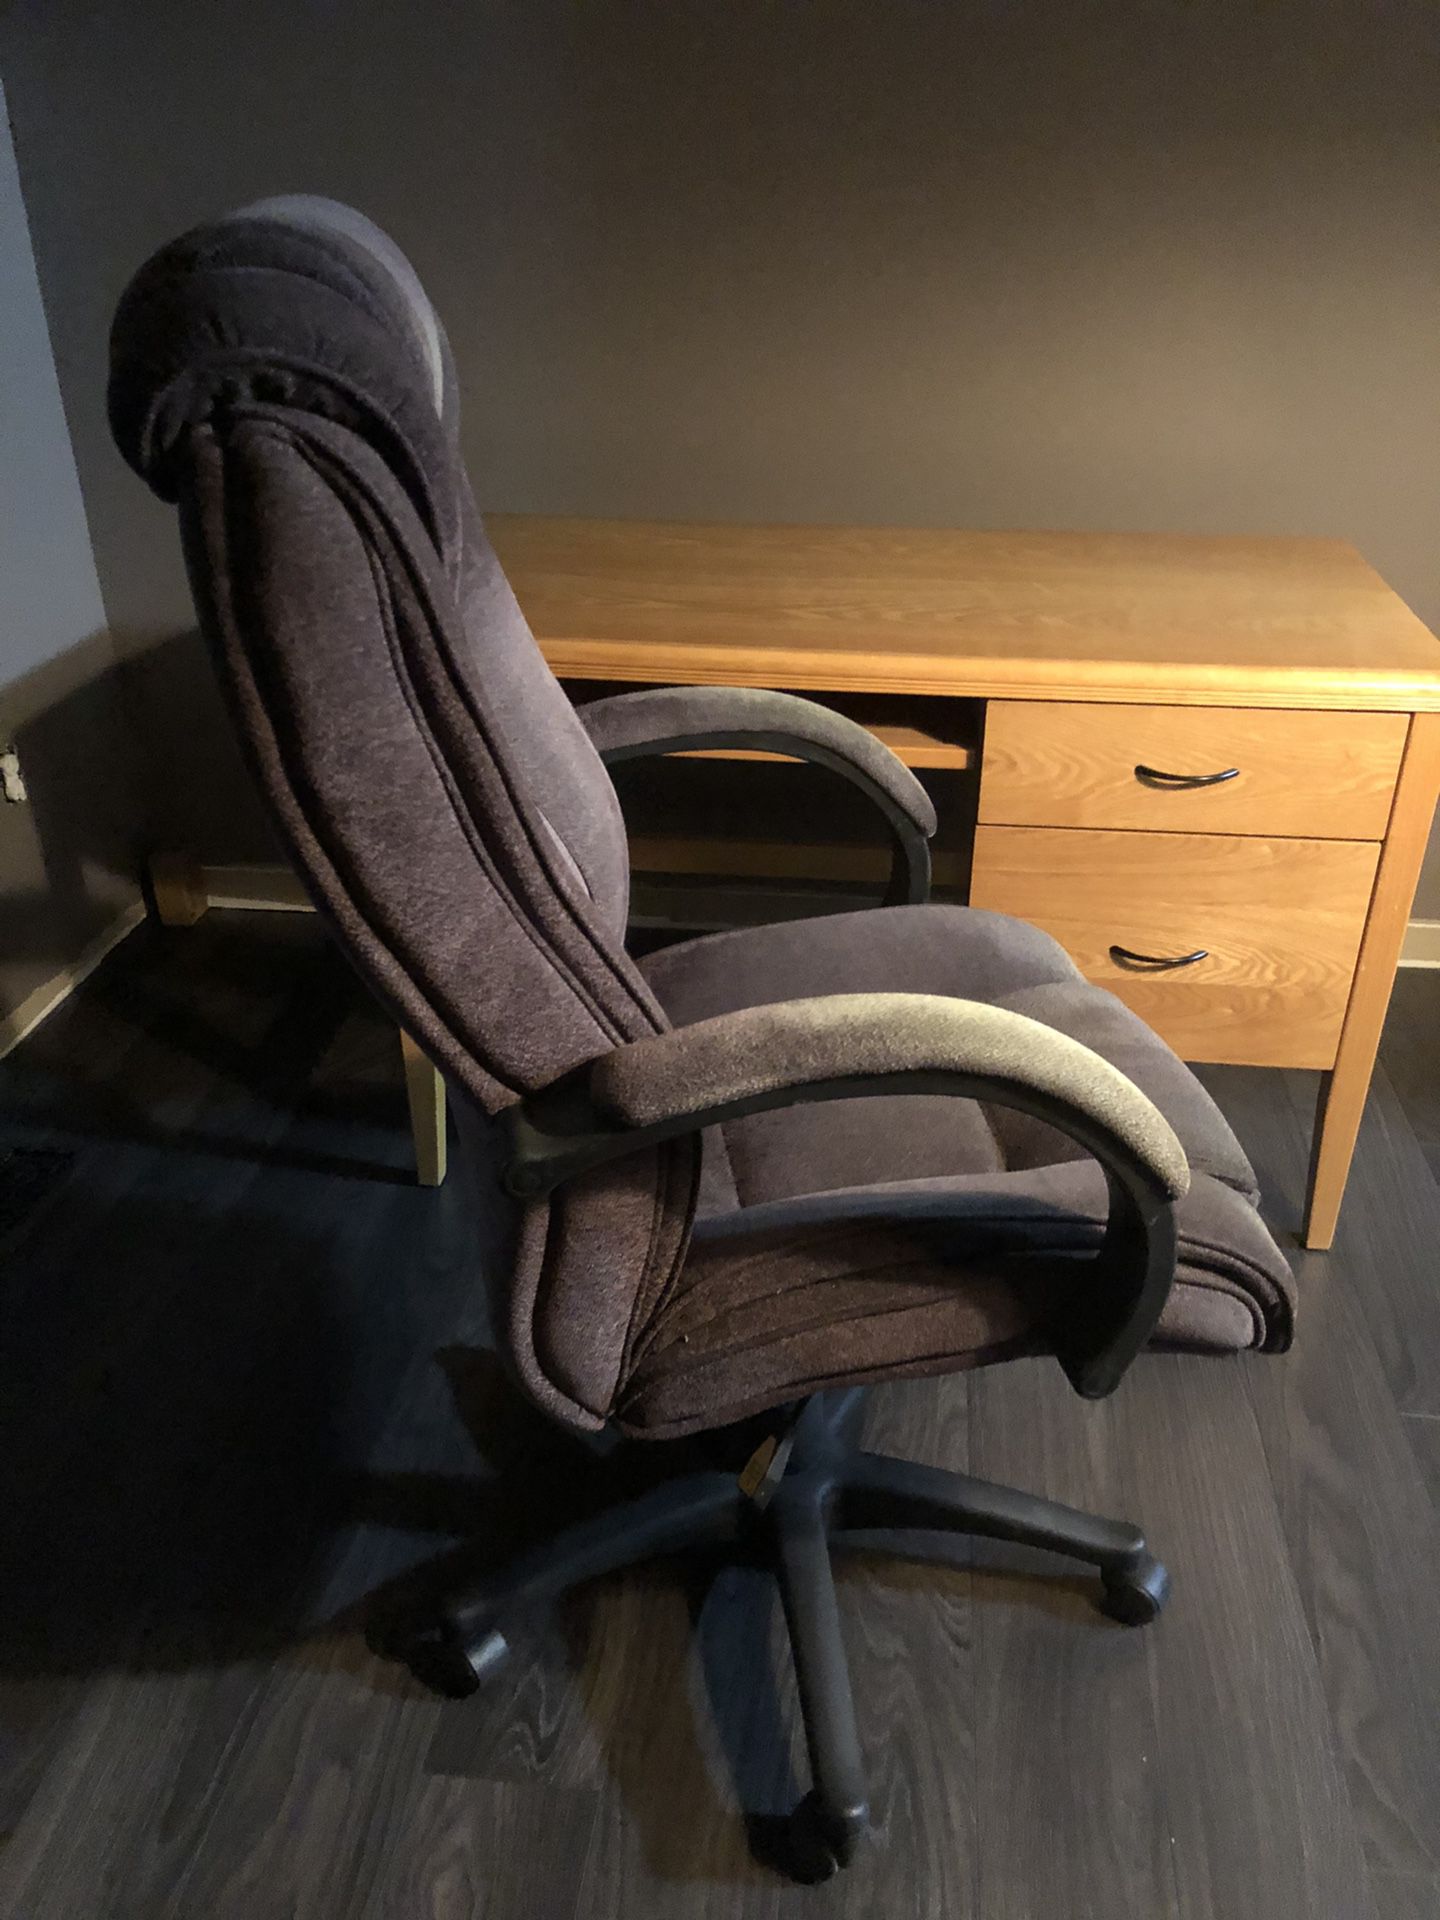 Very Comfy Office / Crafting Chair!